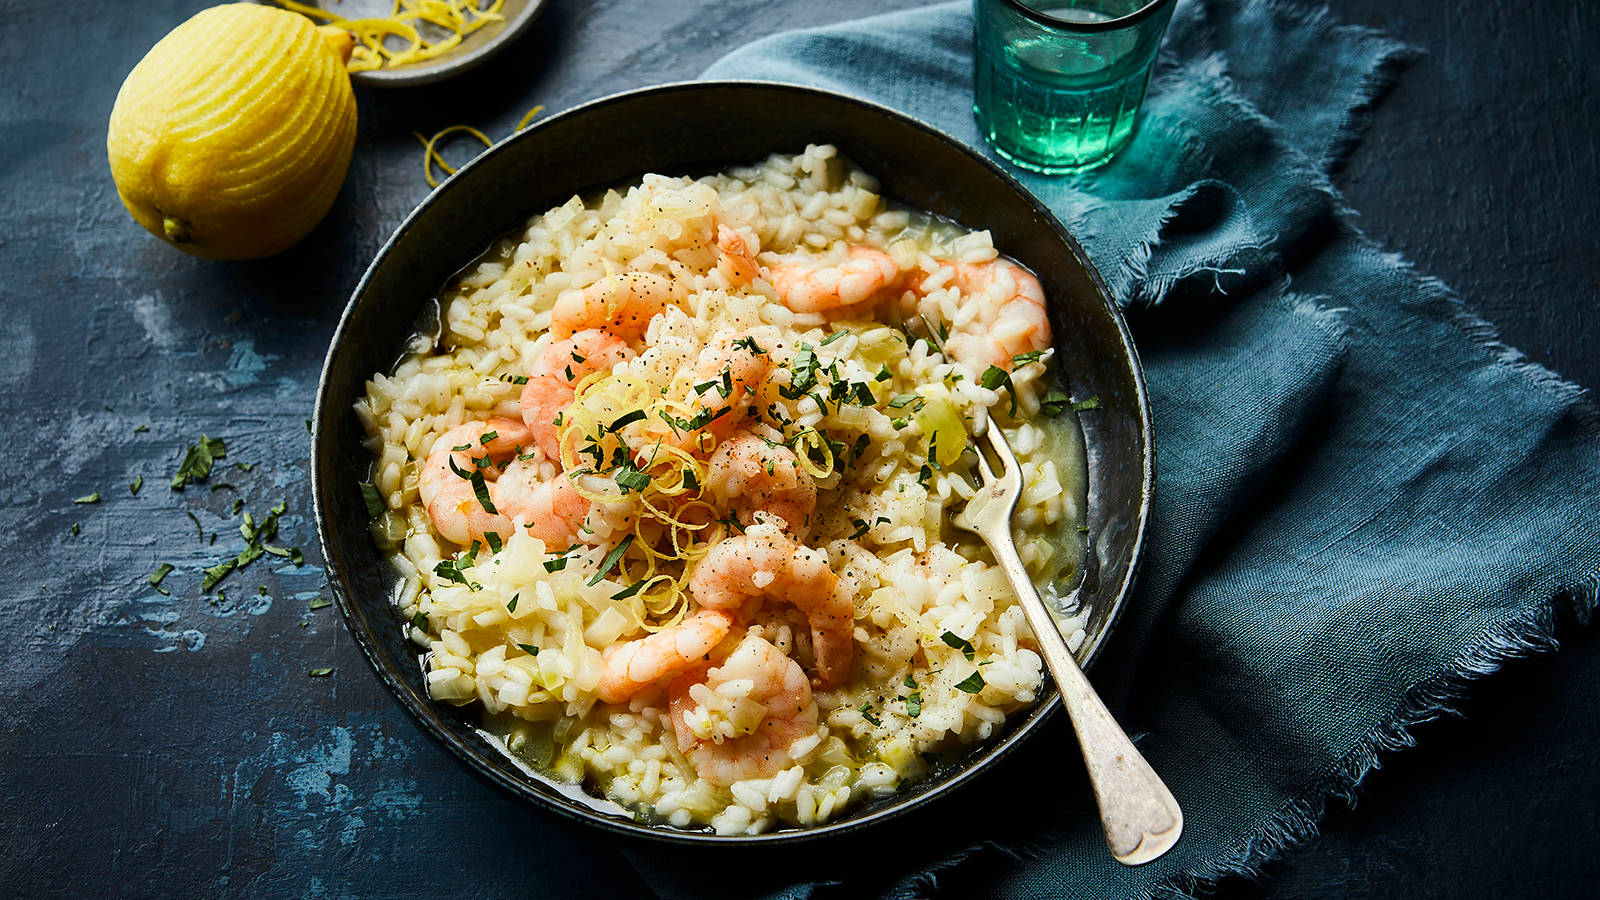 Delicious prawn and celery risotto served on a plate Wallpaper